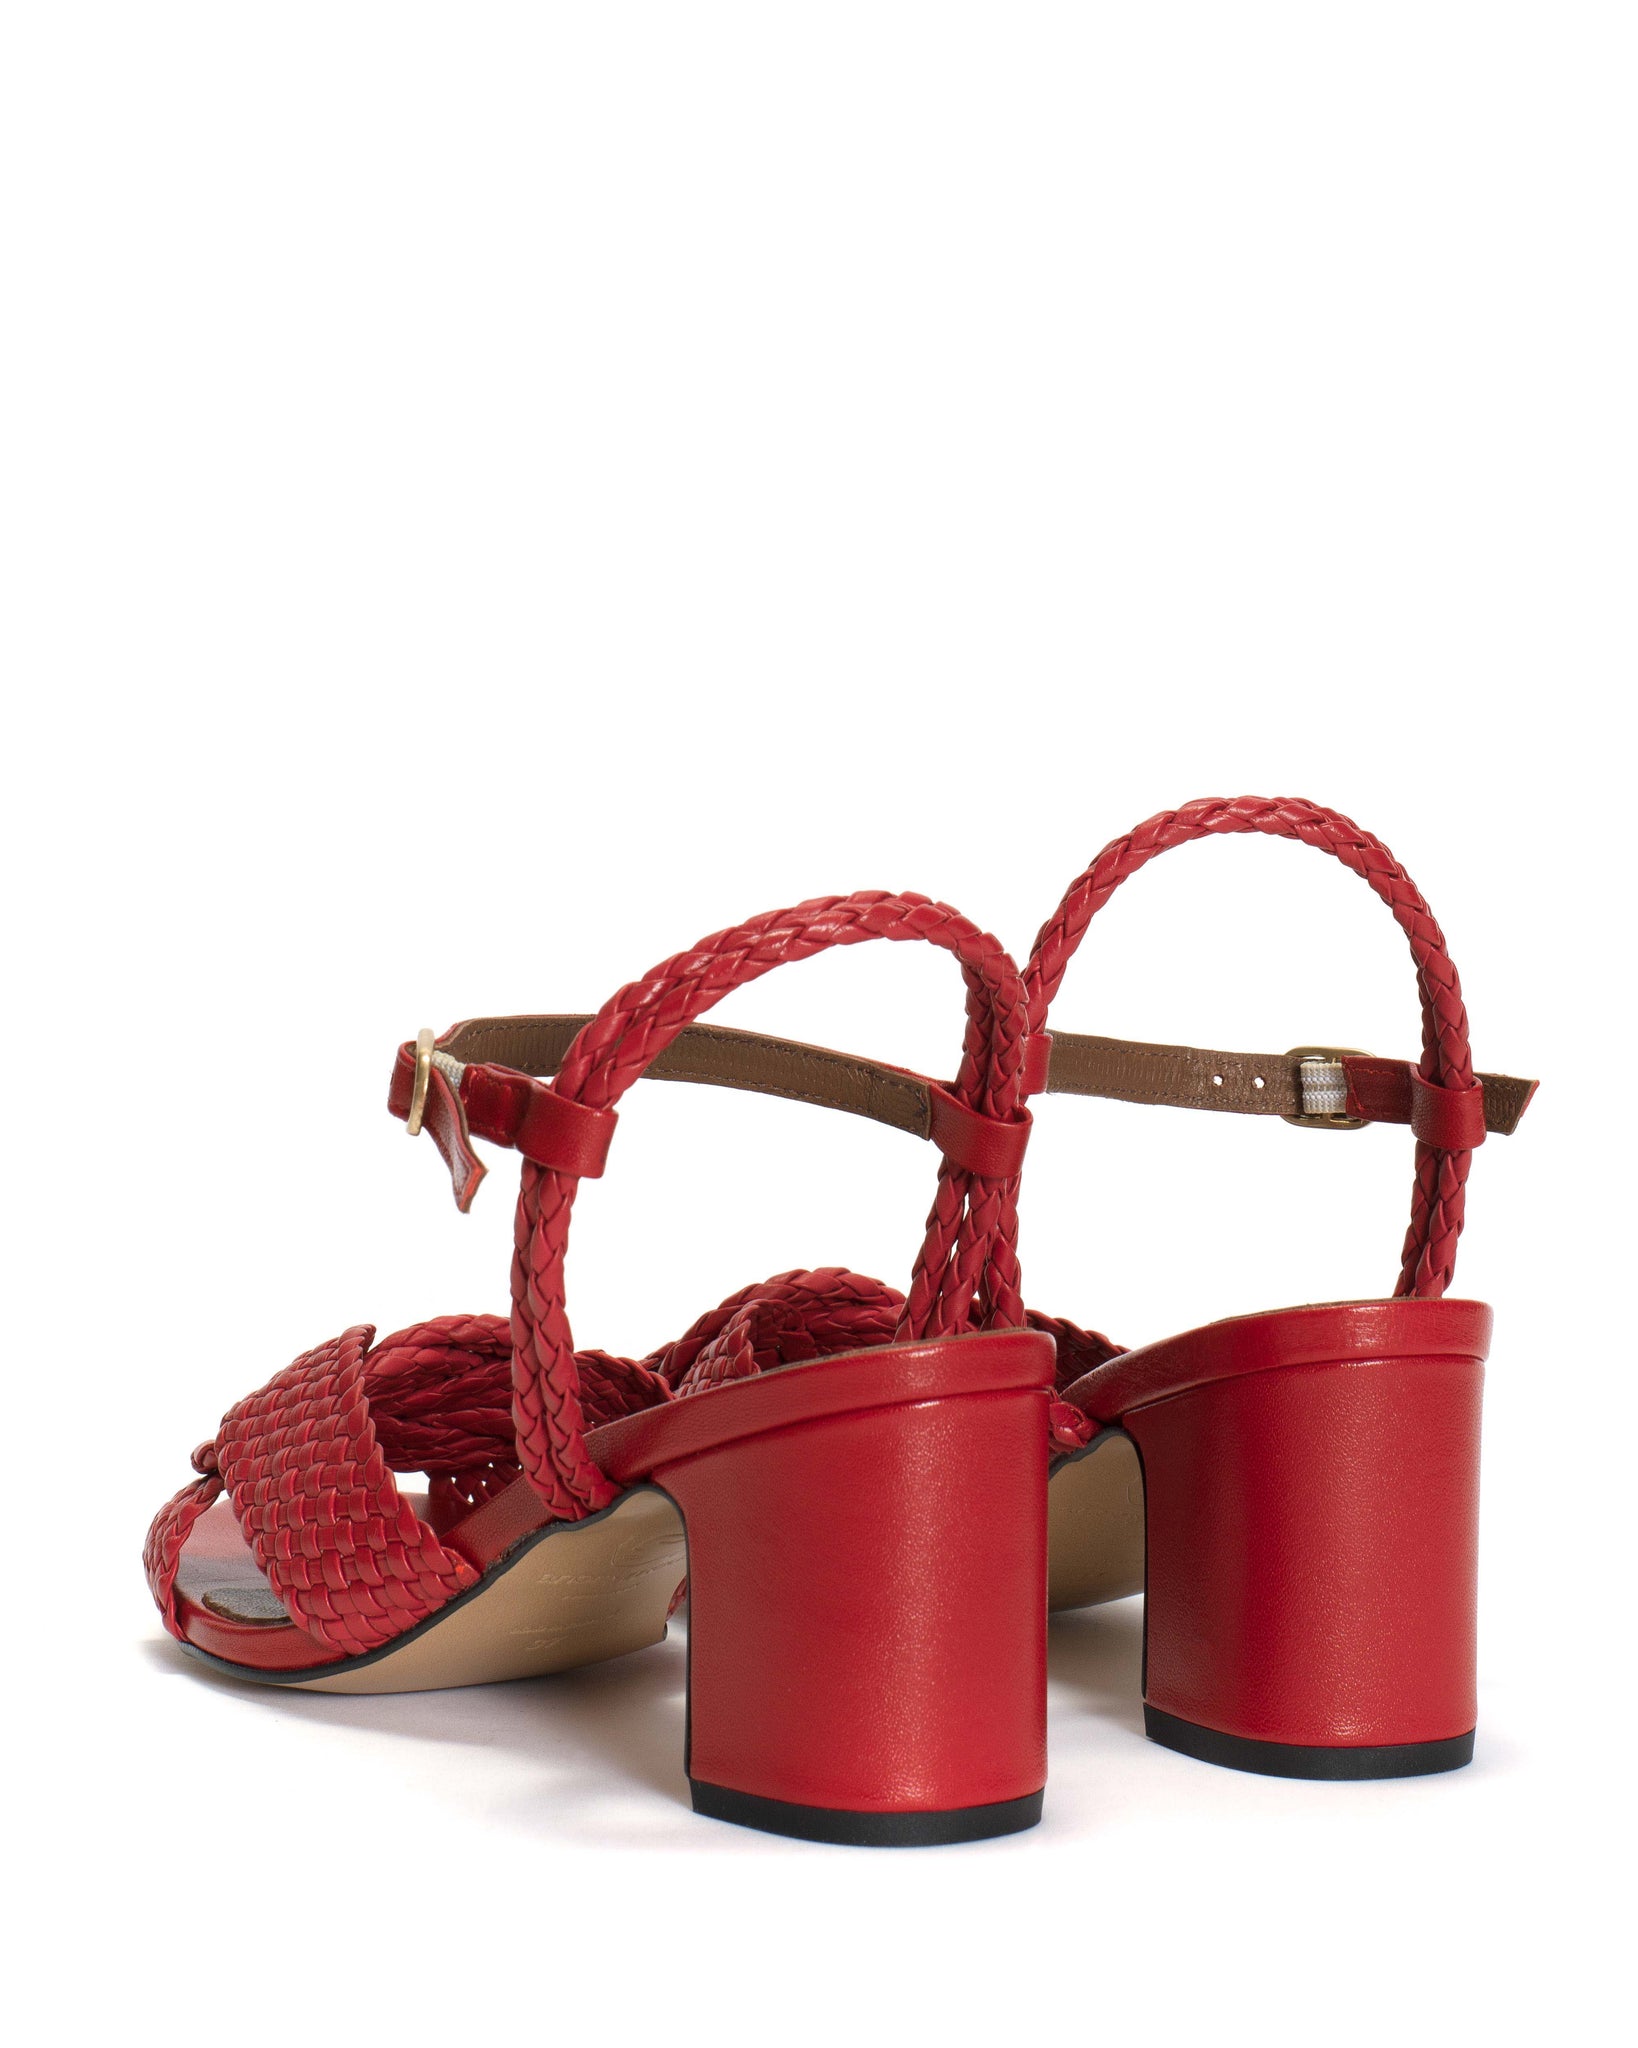 Dilaya 55 Hand-braided leather Ruby red